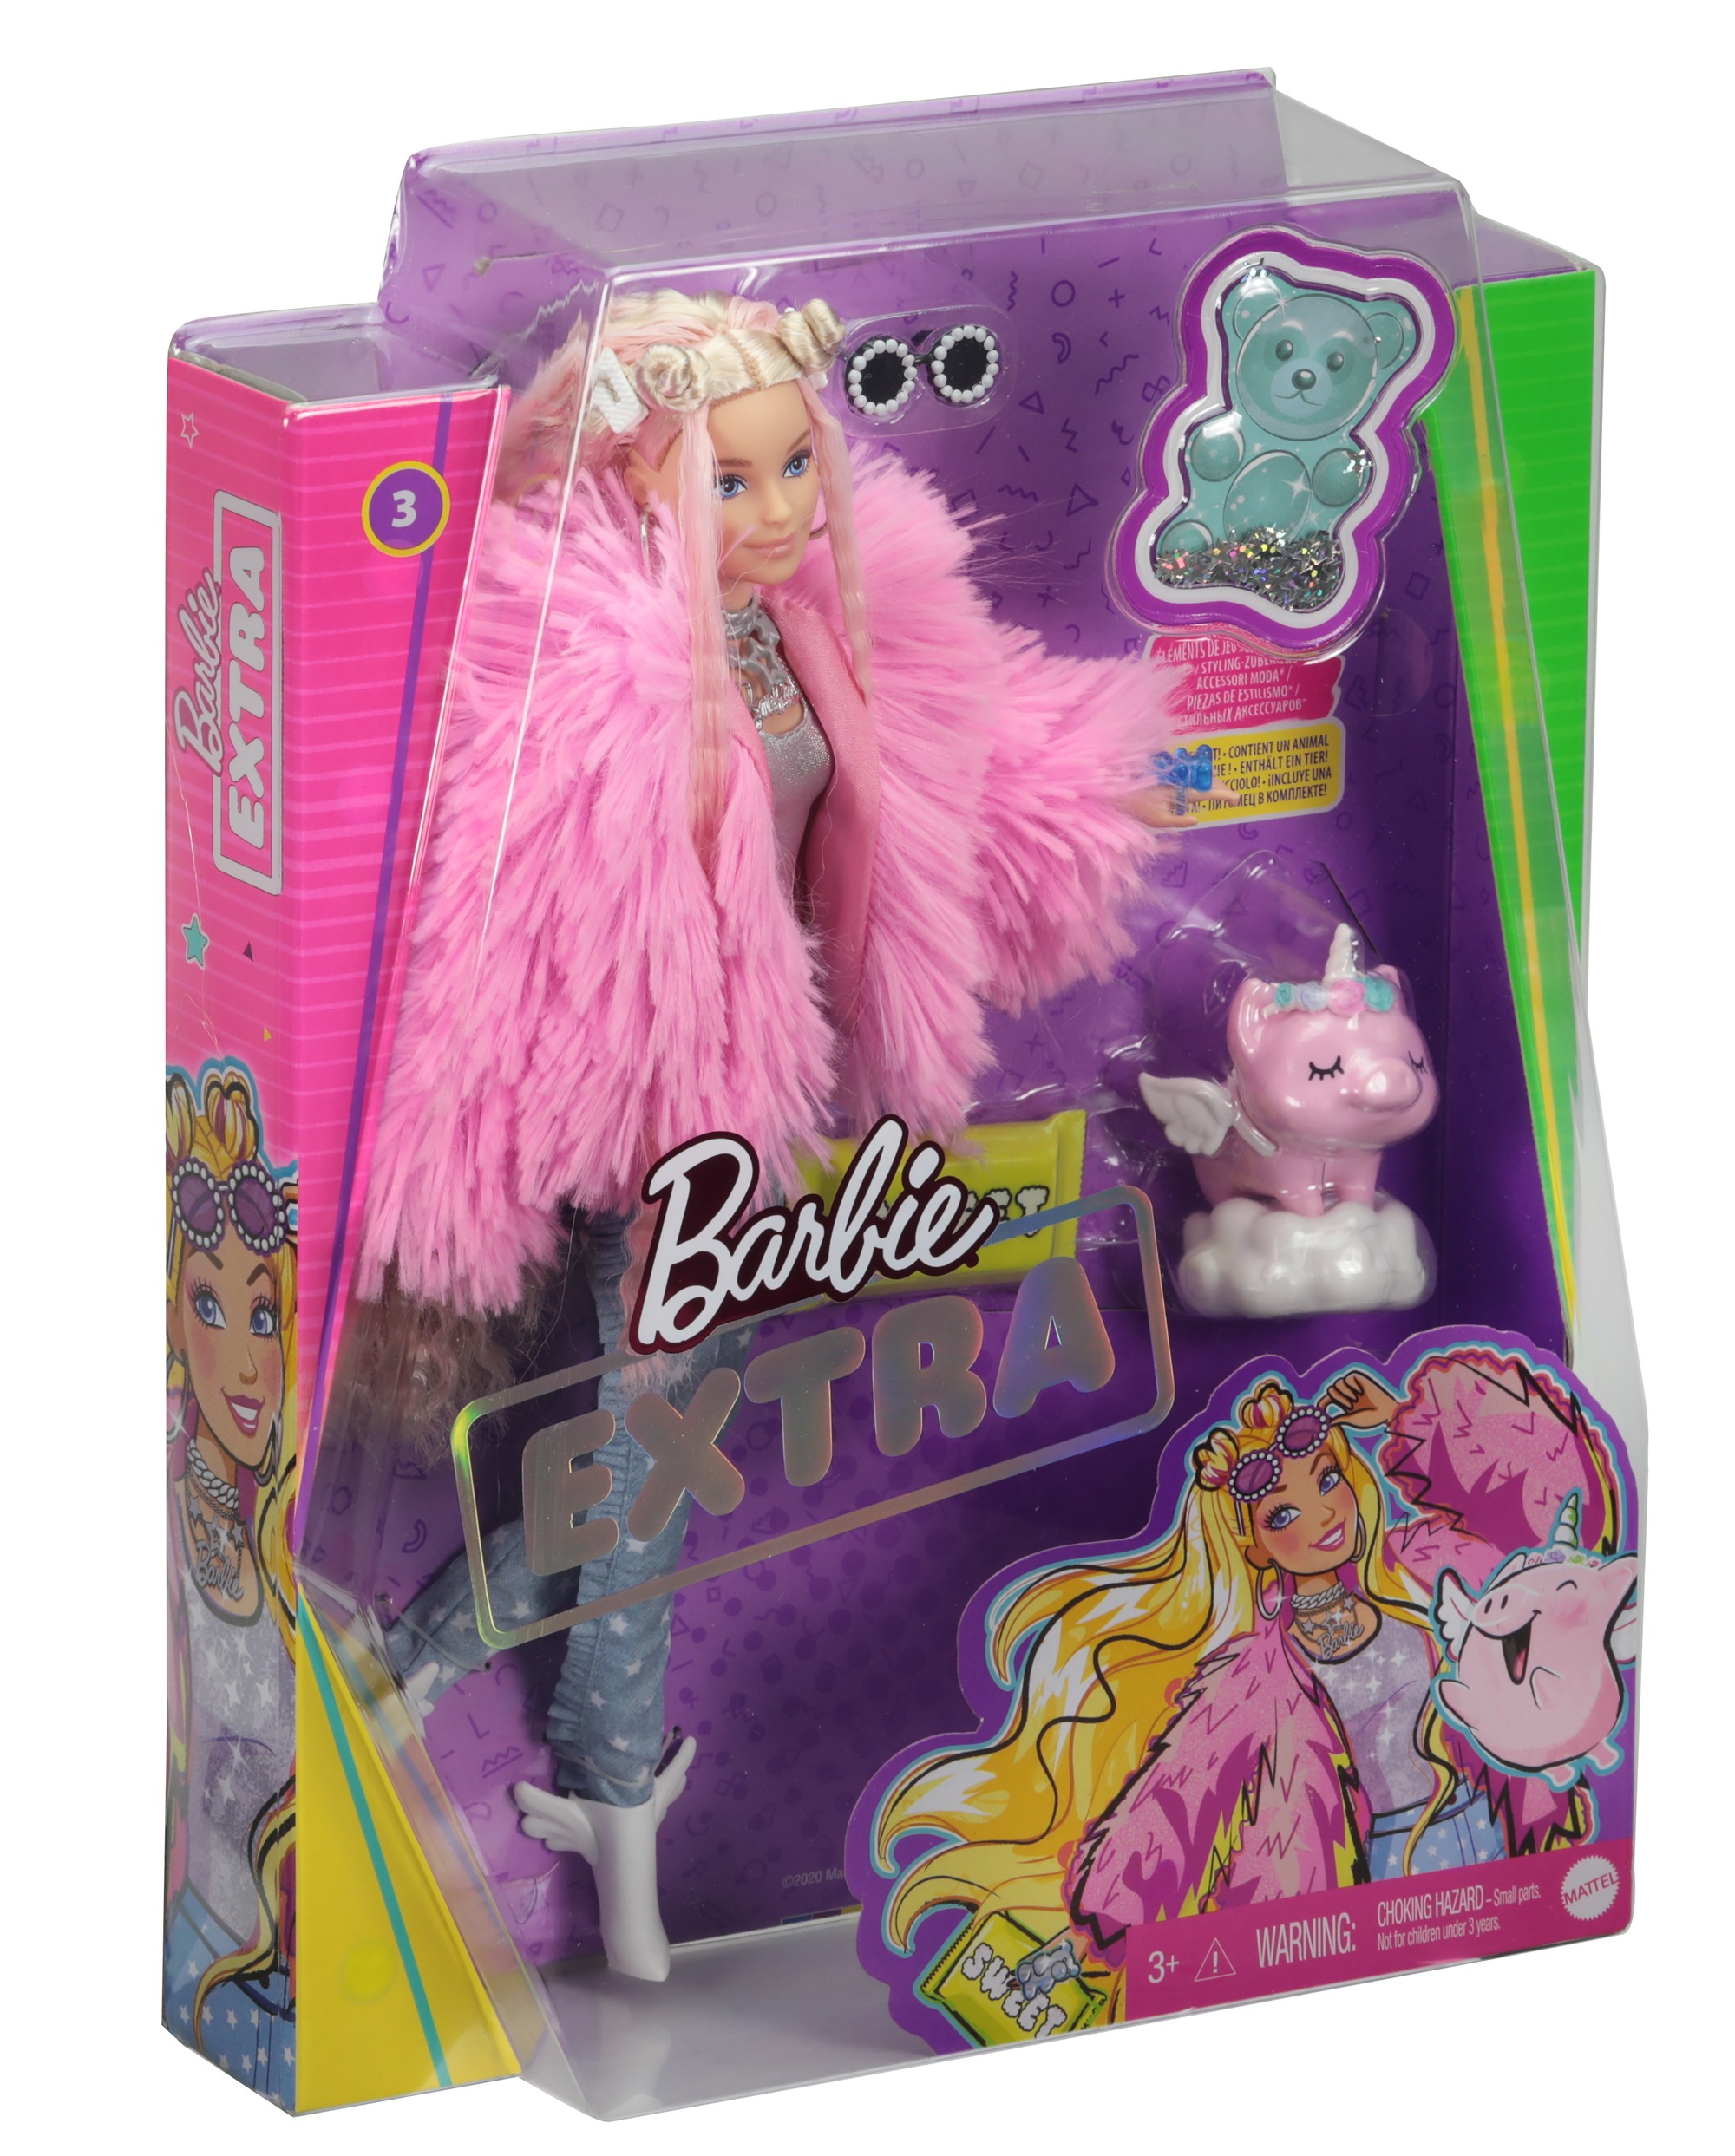 Barbie Extra Doll #3 in Pink Coat with Pet Unicorn-Pig for Kids 3 Years Old & Up